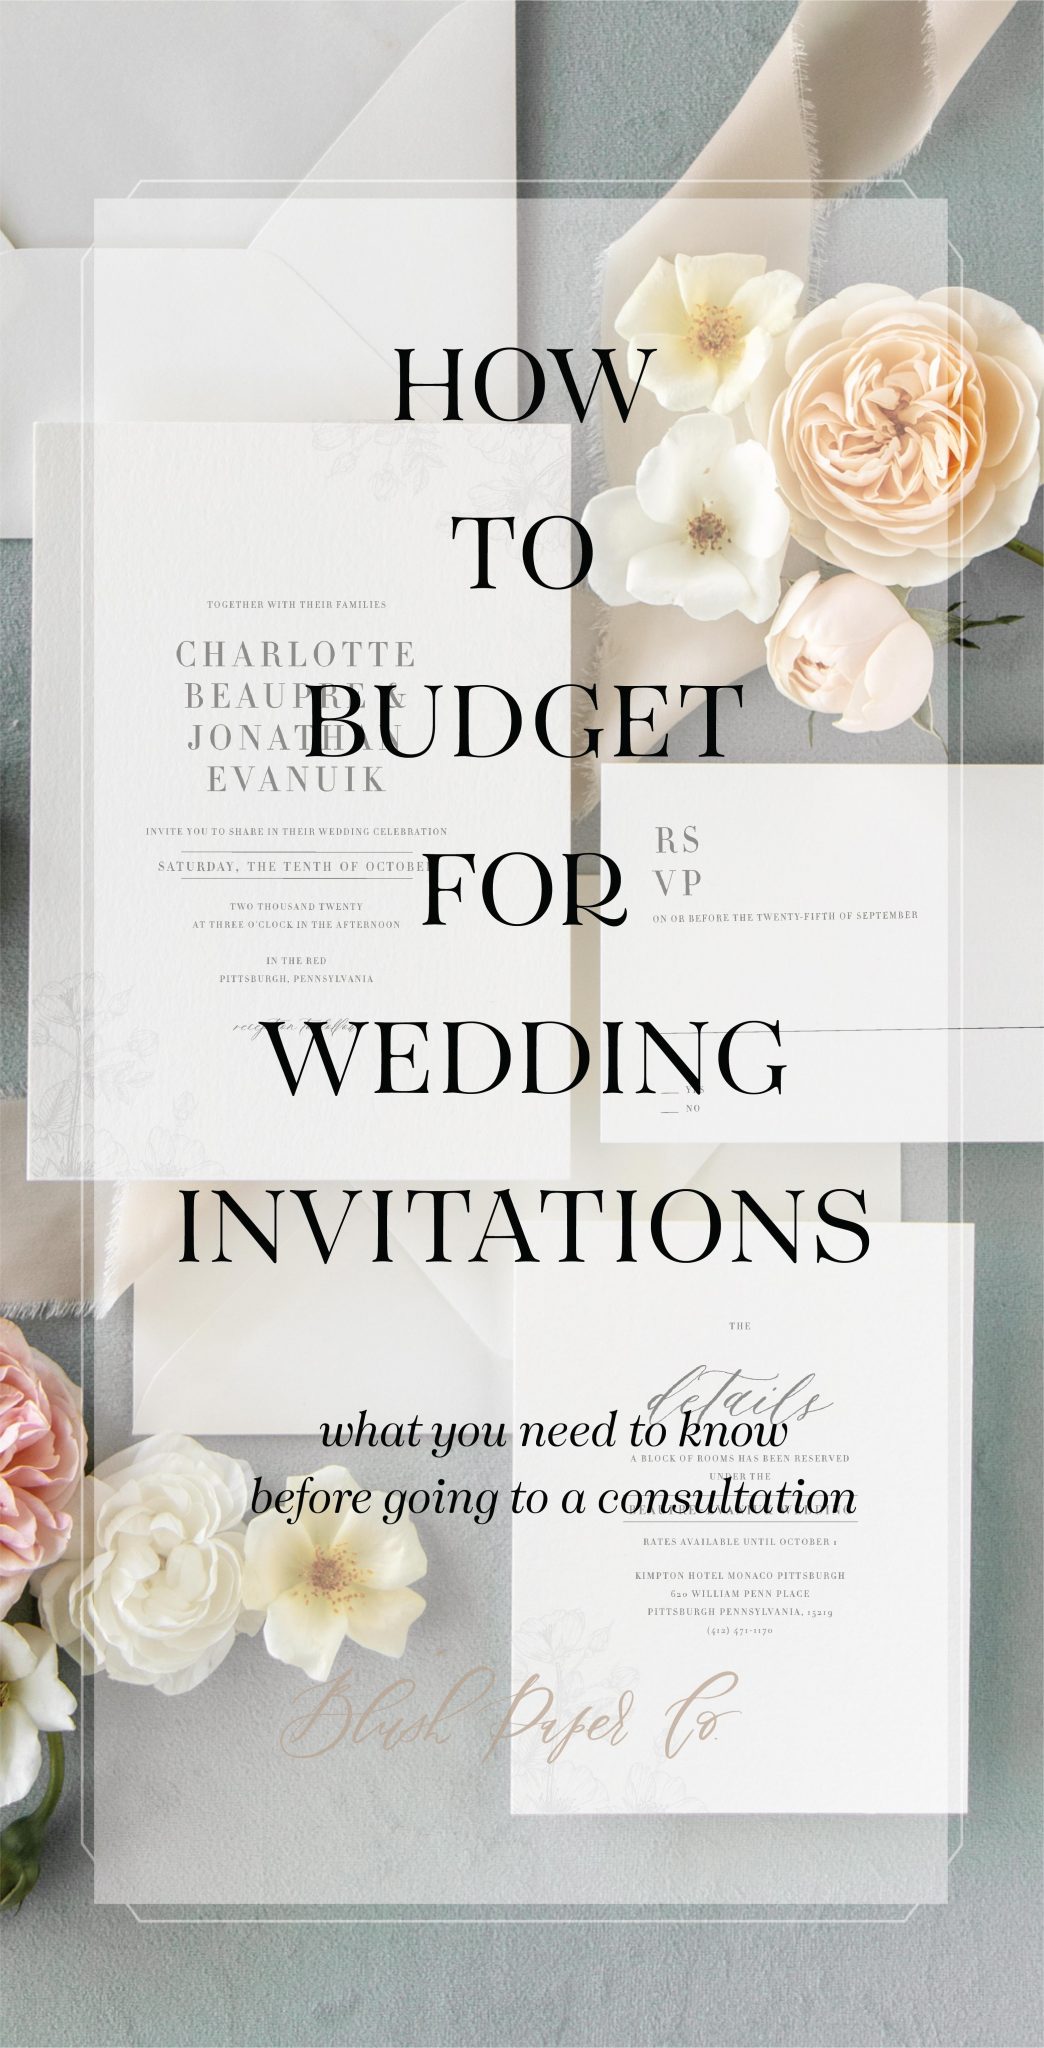 how much should i spend on wedding invitations? - blog.blushpaperco.com